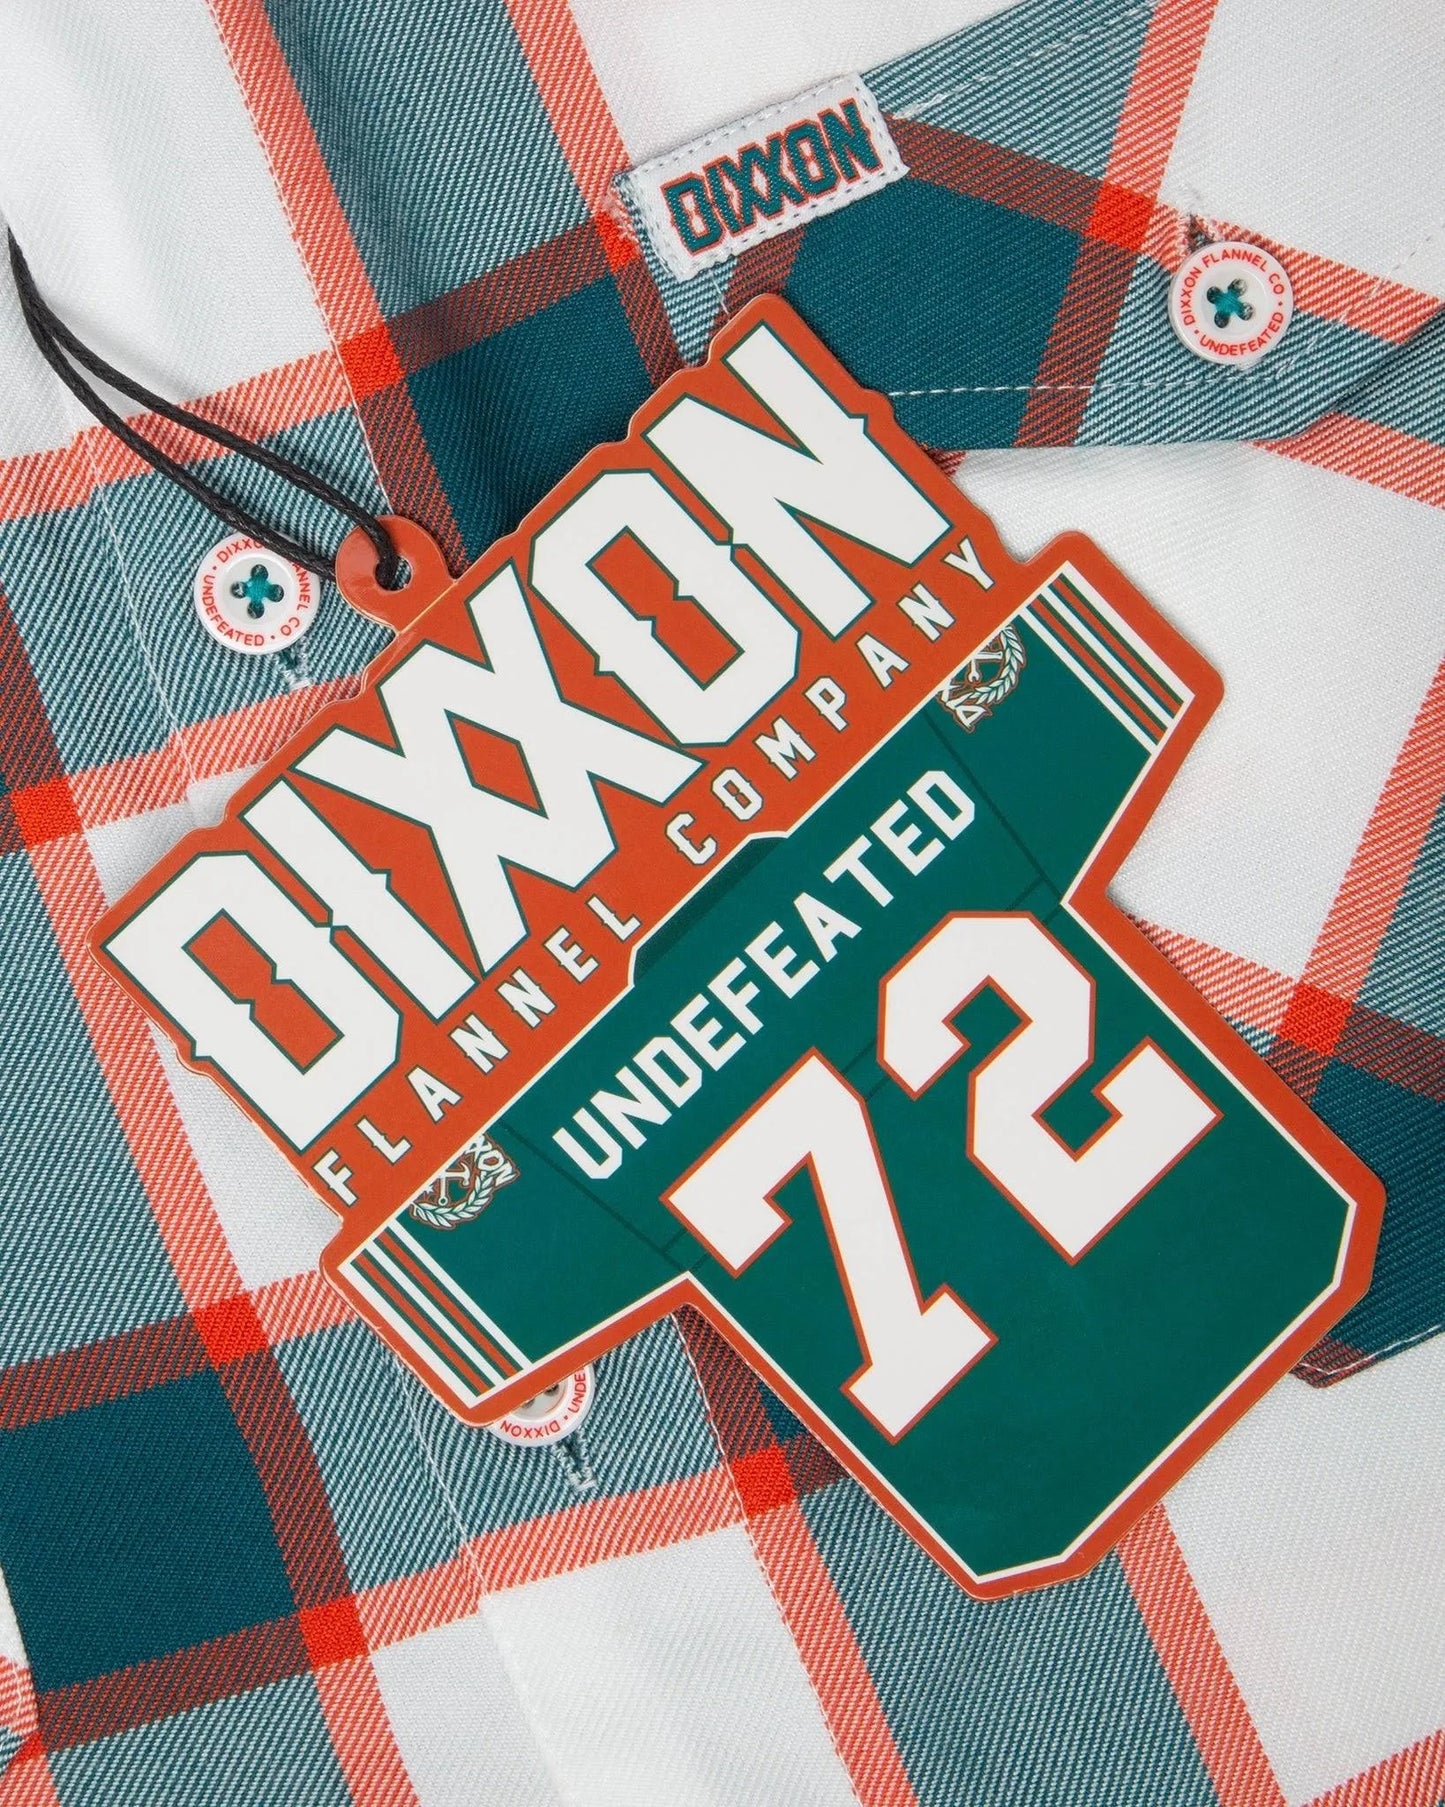 Undefeated Flannel by Dixxon Flannel Co.